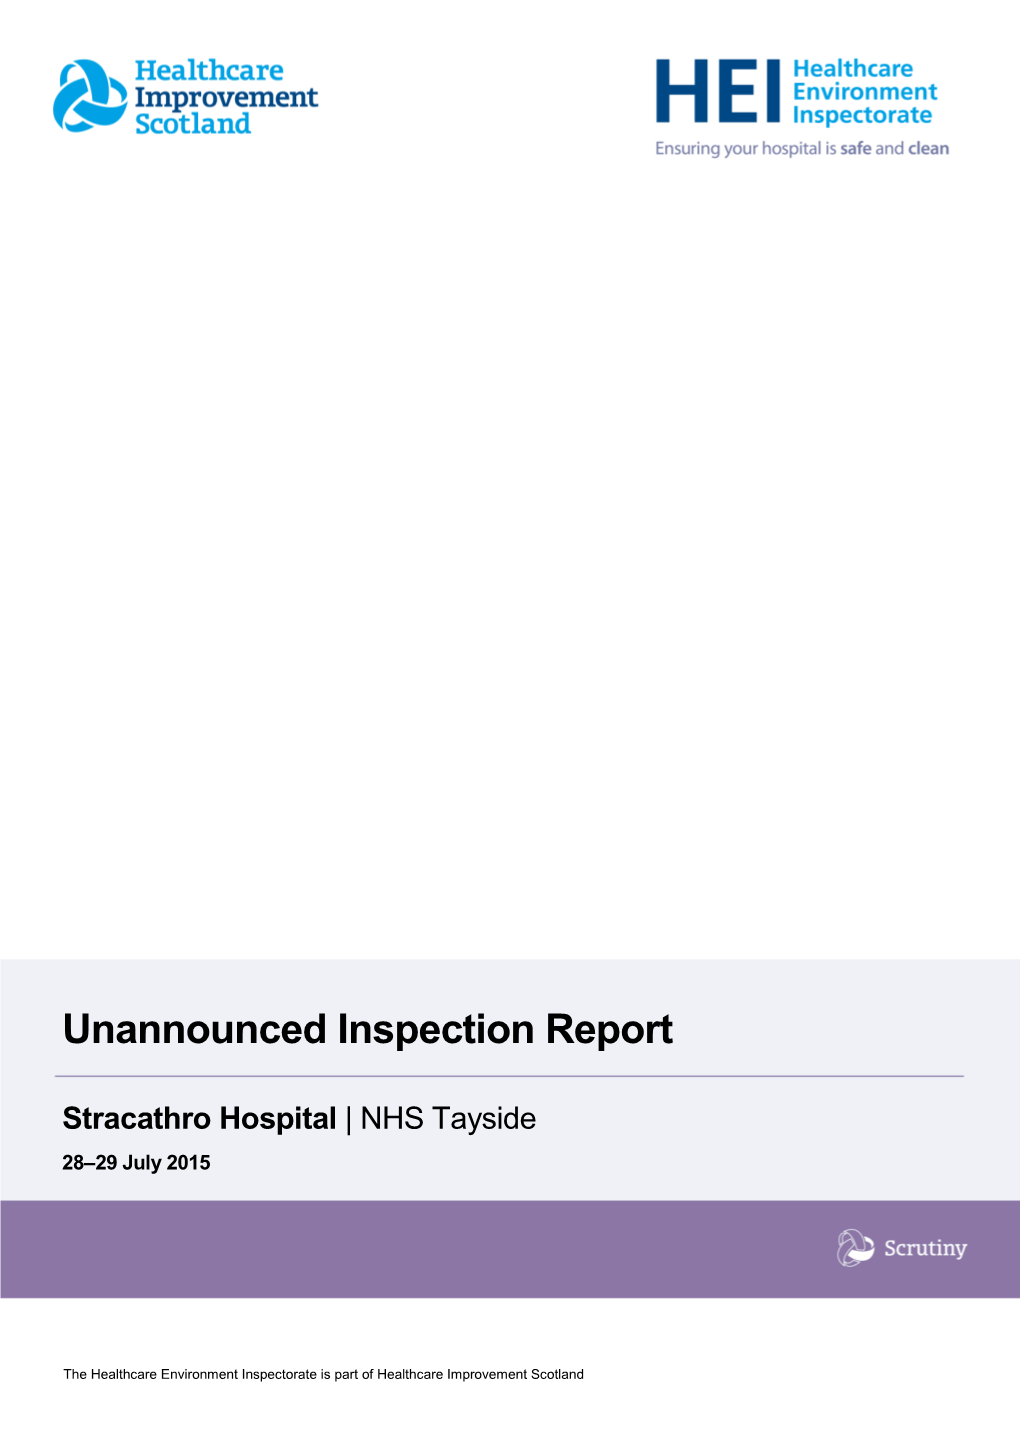 Stracathro Hospital Unannounced Inspection Report Sep 2015